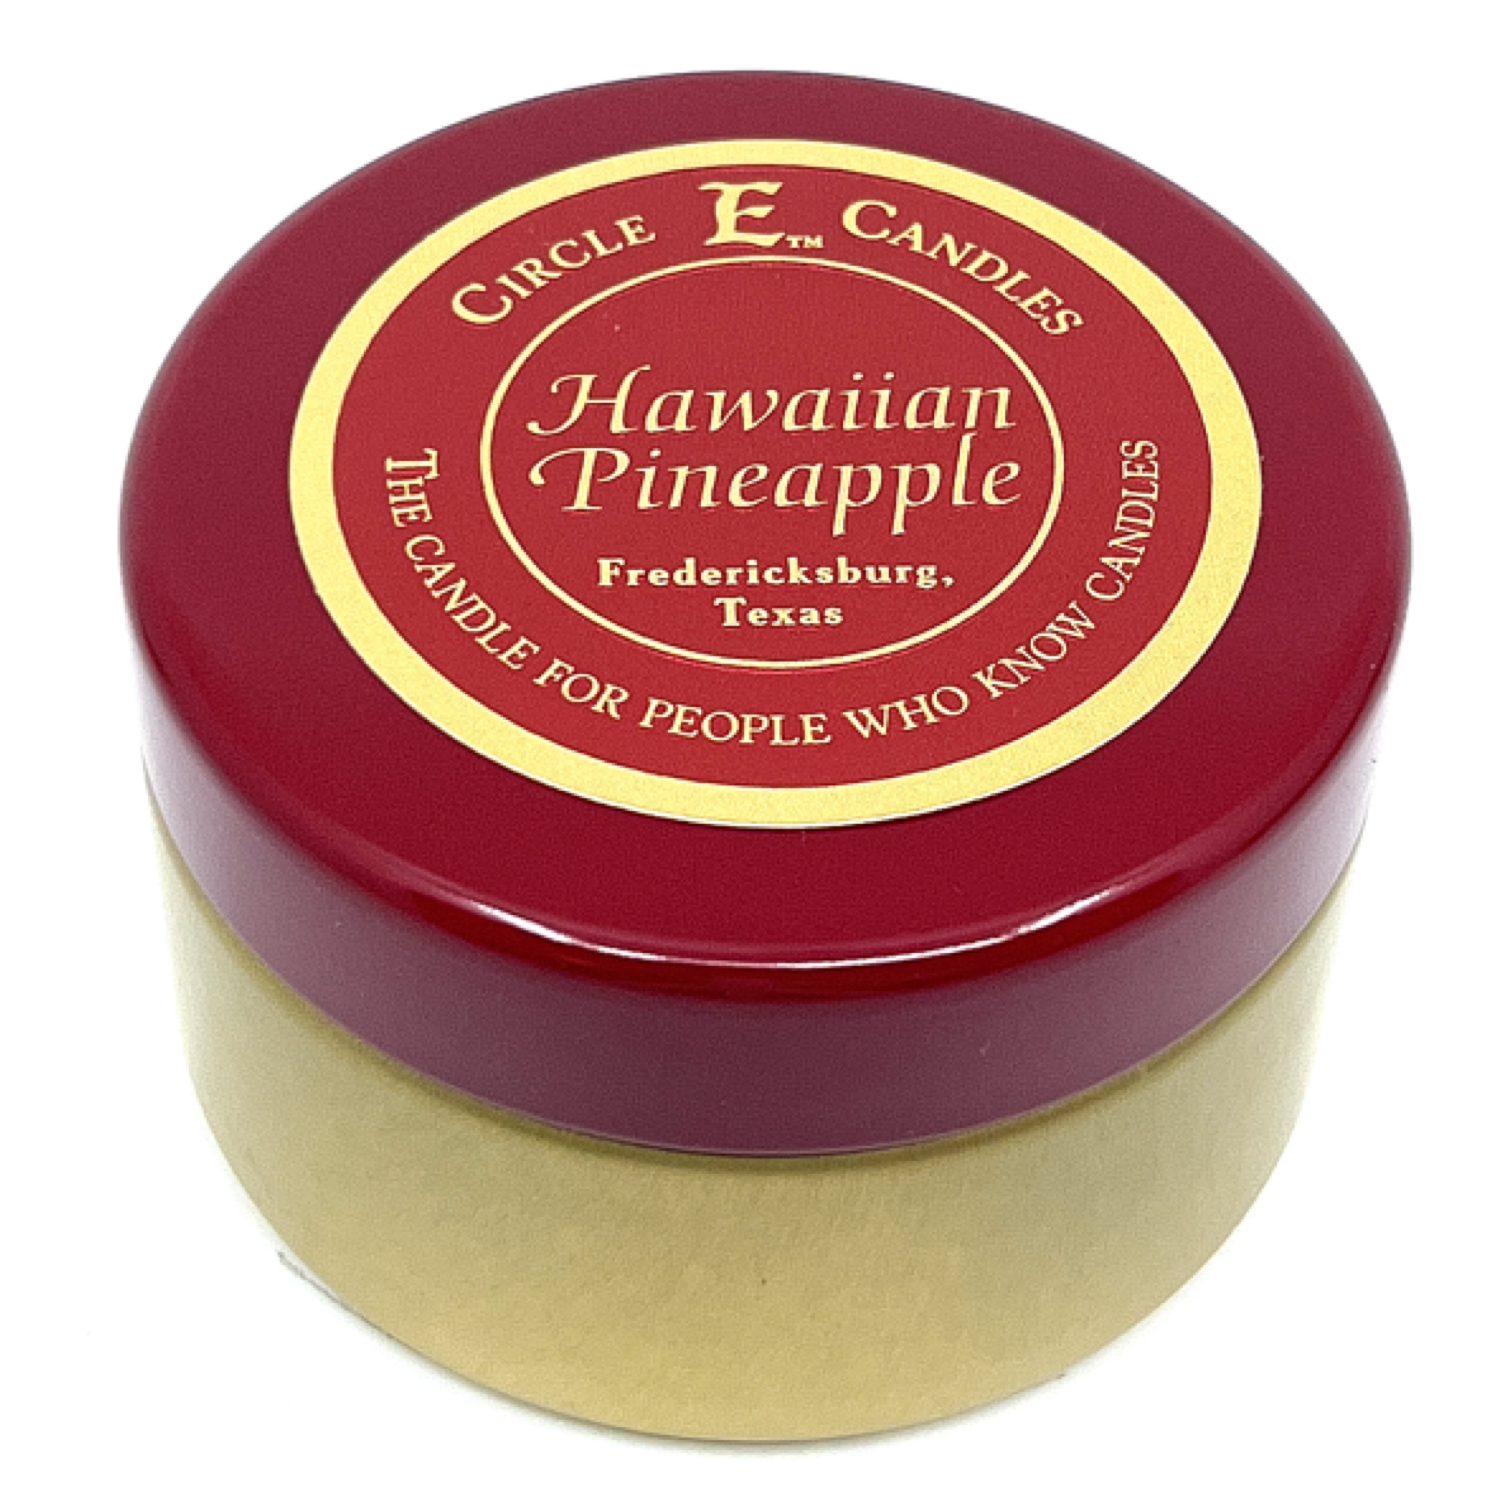 Circle E Candles, Hawaiian Pineapple Scent, Extra Small Size Travel Tin Candle, 4oz, 1 Wick